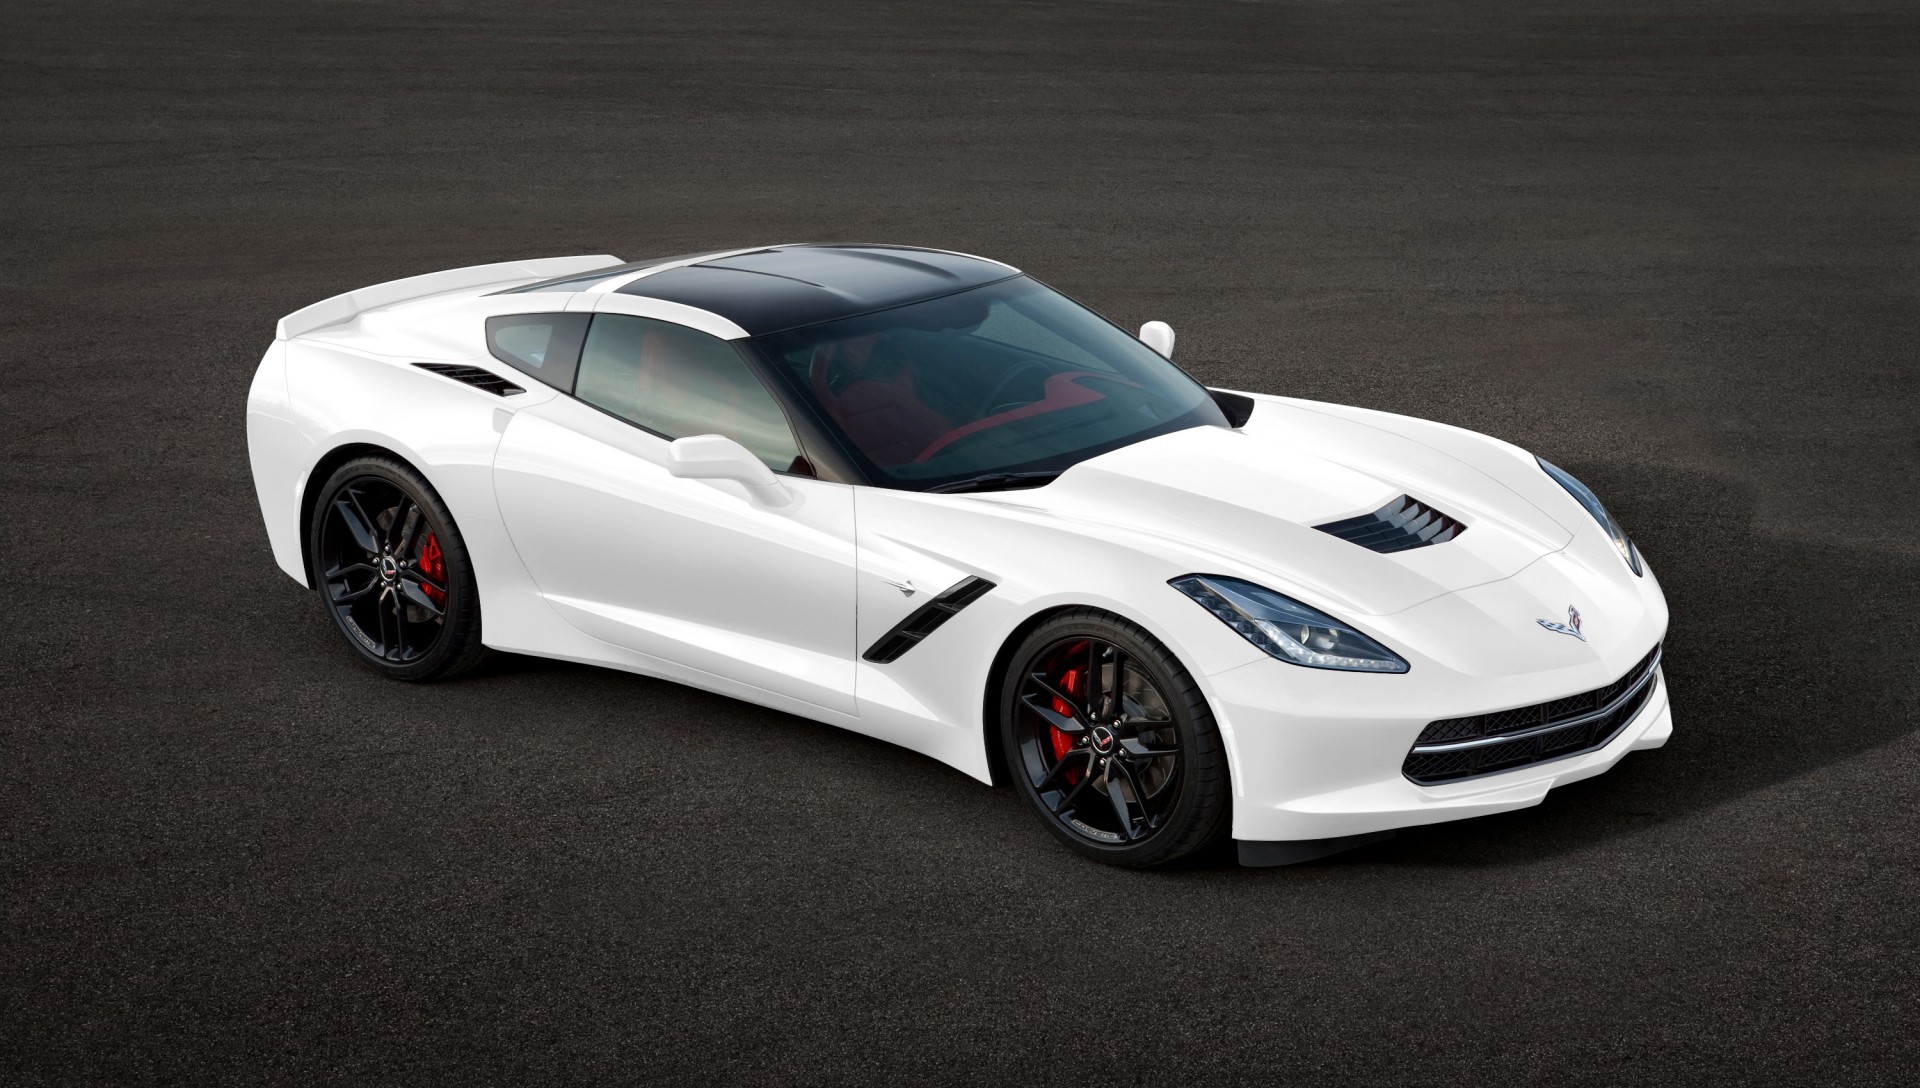 Beautiful car Chevrolet Corvette 2014 wallpapers and images ...